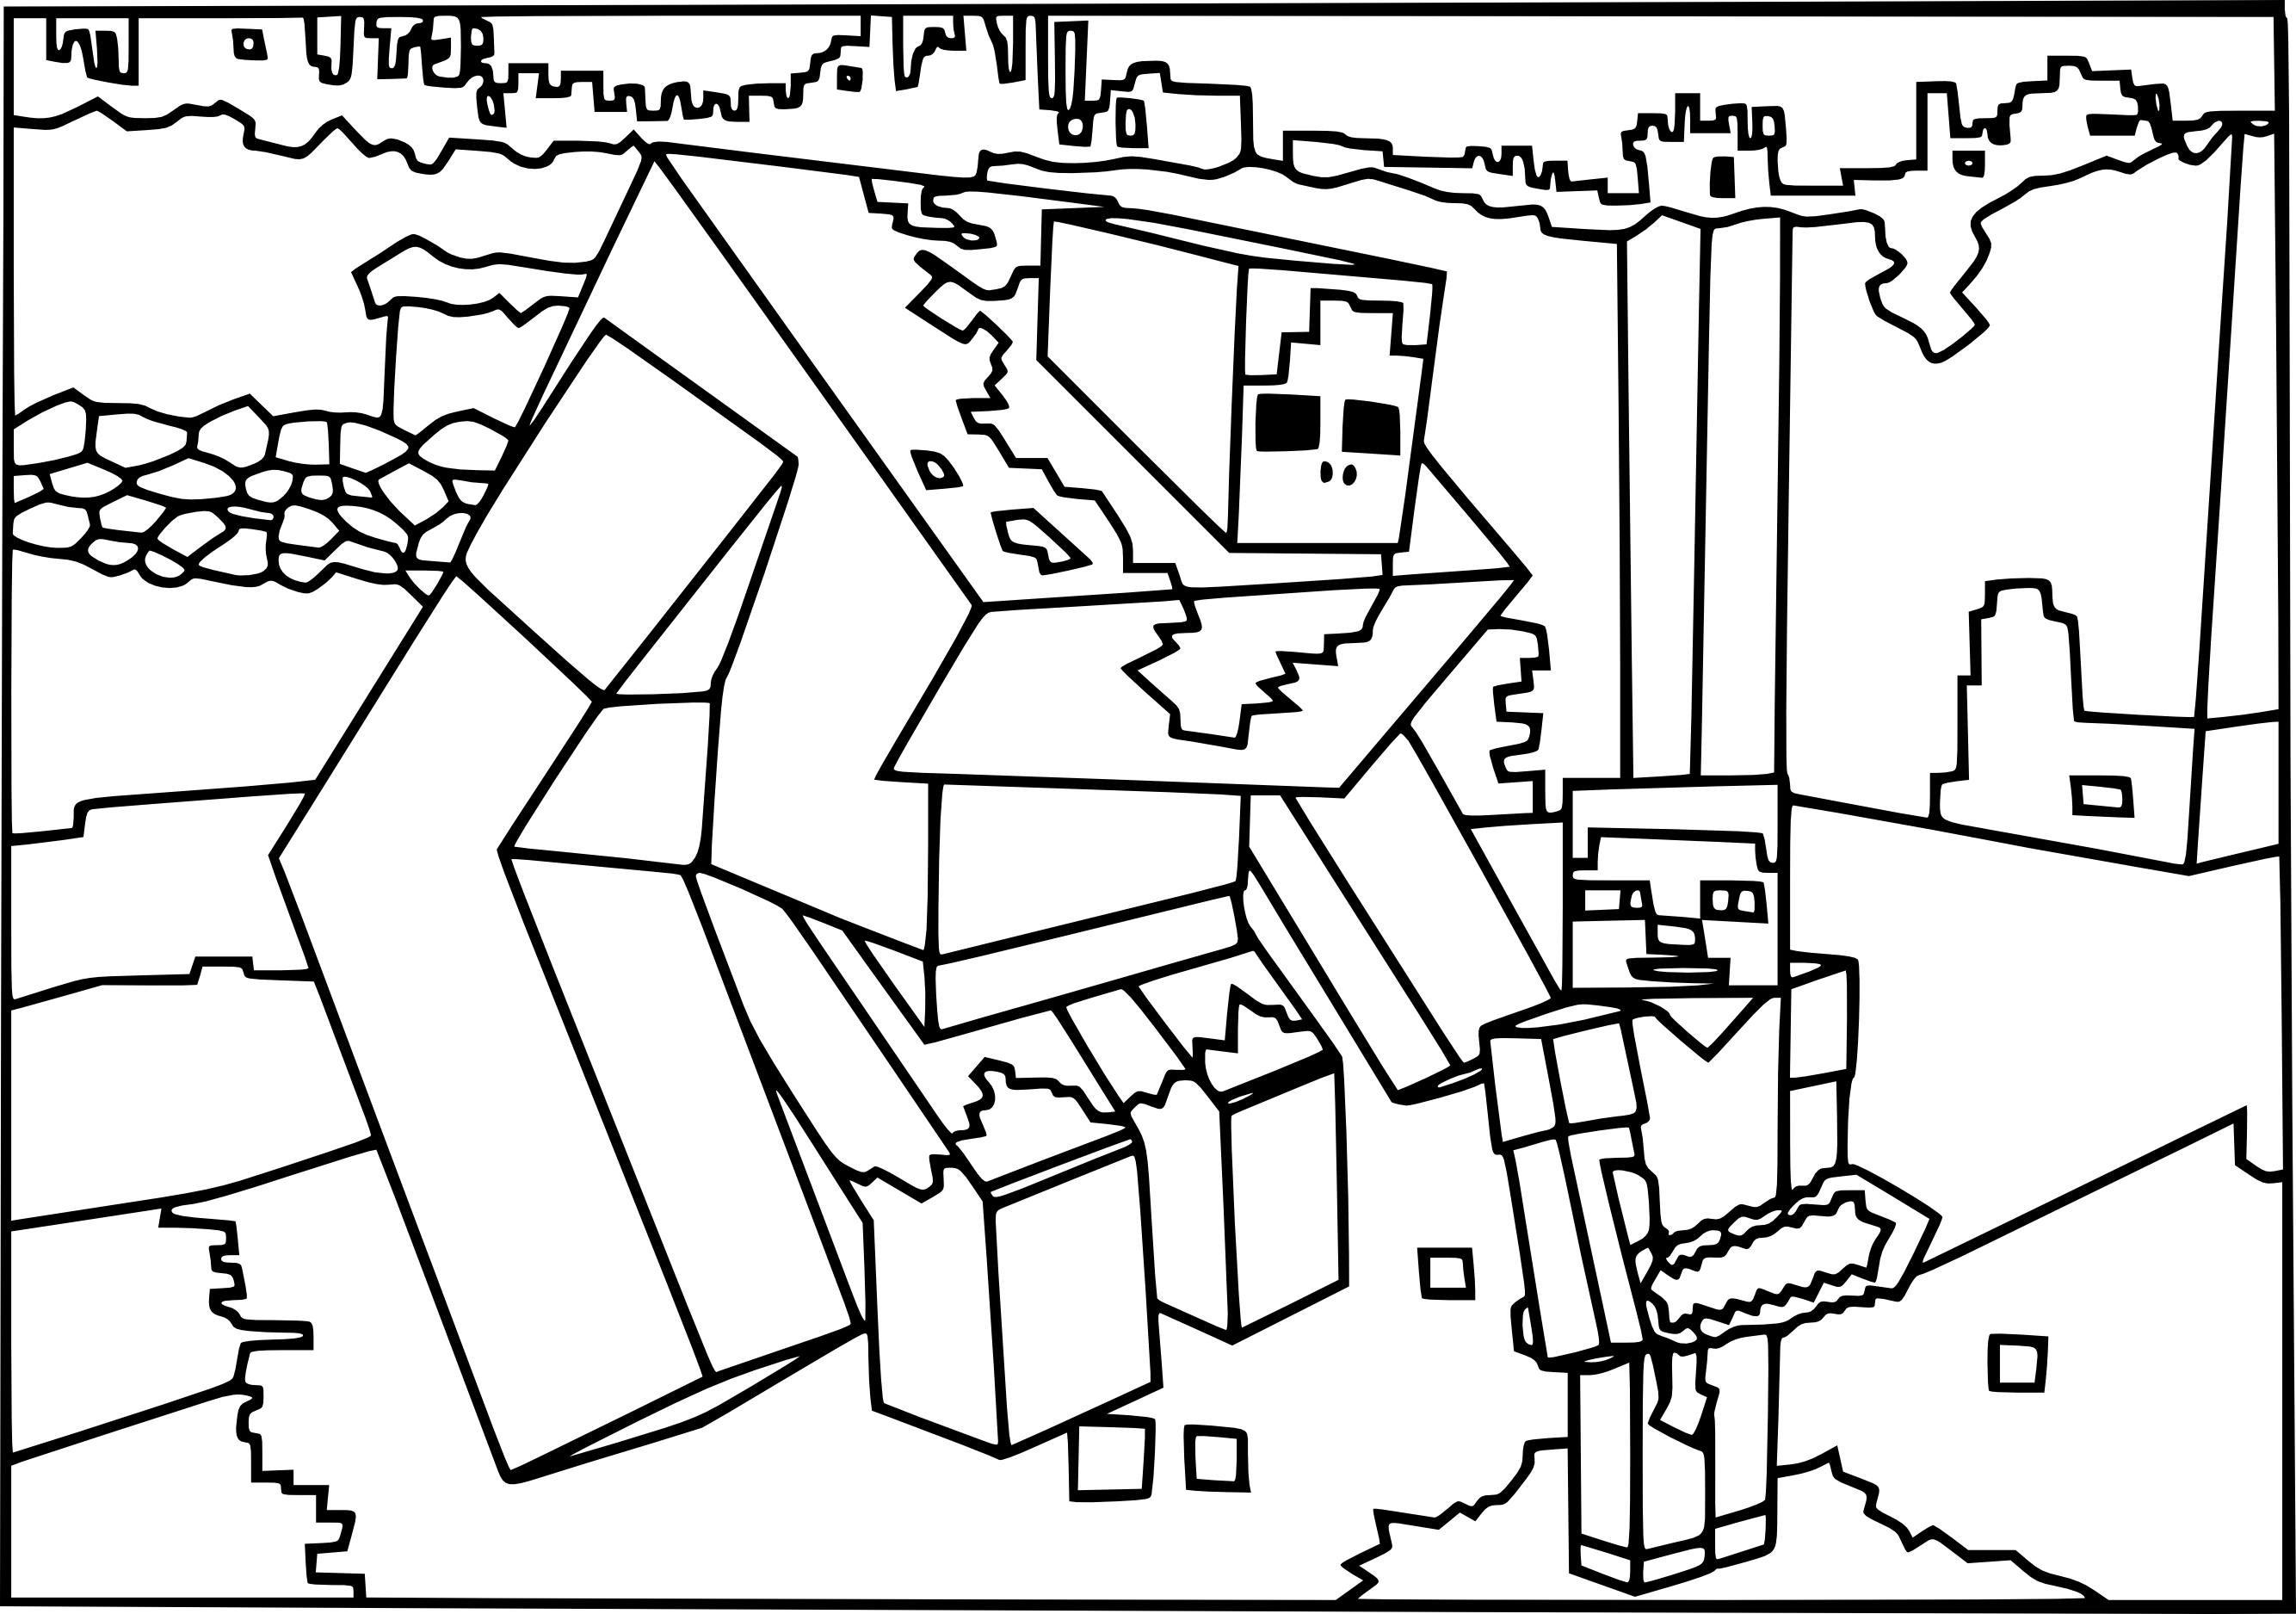 Minecraft mutant zombie coloring page to print and color